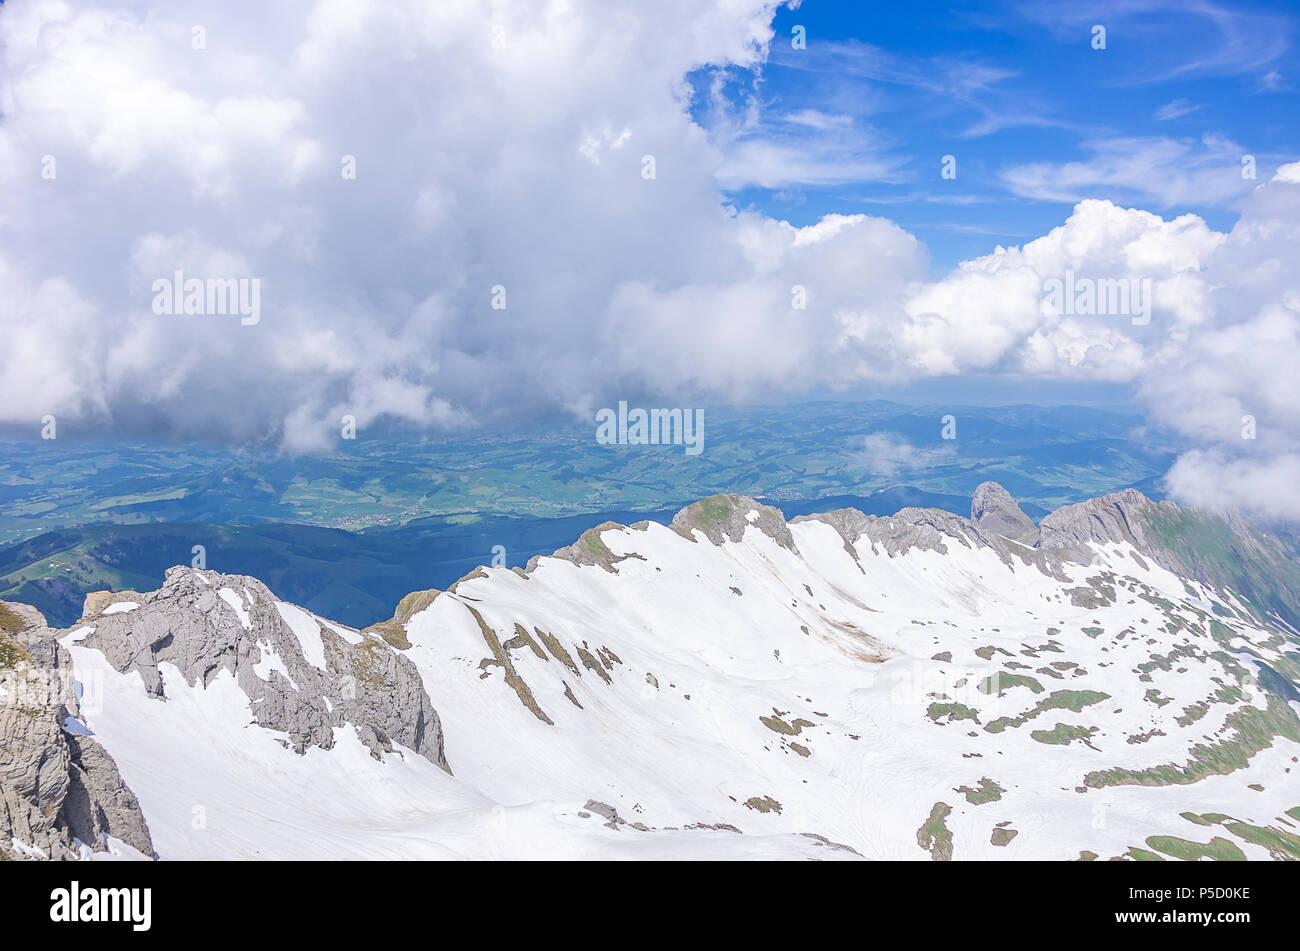 On the peak of Säntis Mountain, Appenzell Alps, Switzerland - view of the surrounding landscape. Stock Photo